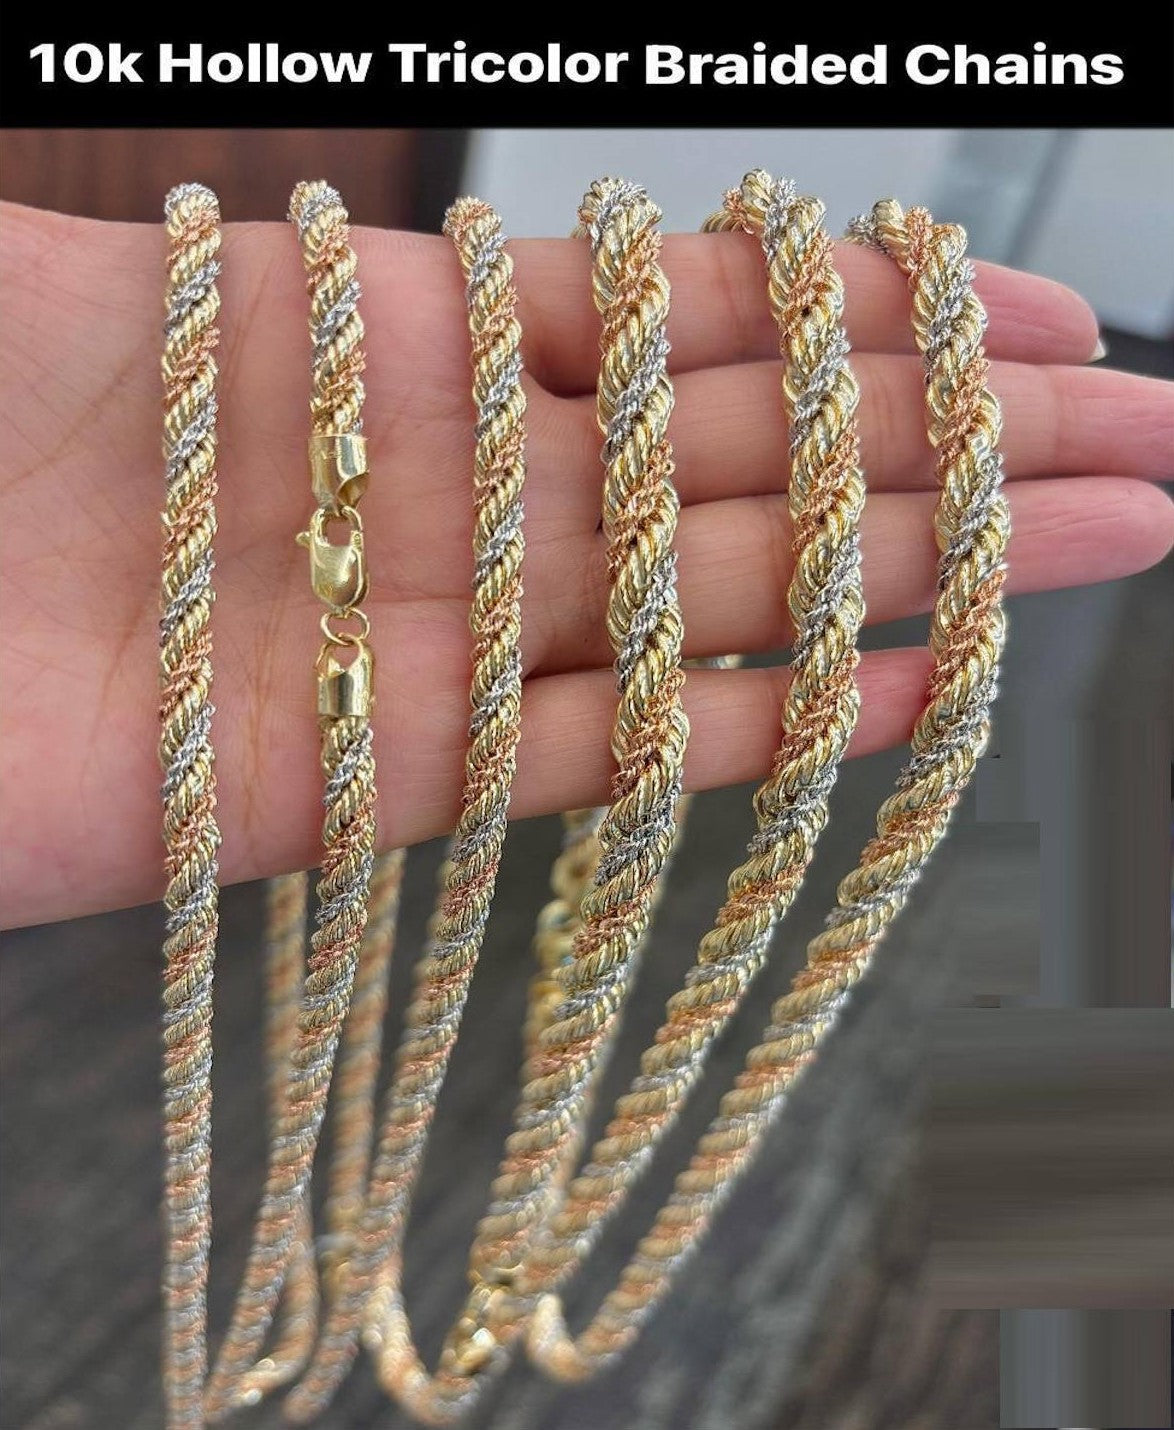 Real Gold 10K Hollow Tricolor Braided Chain